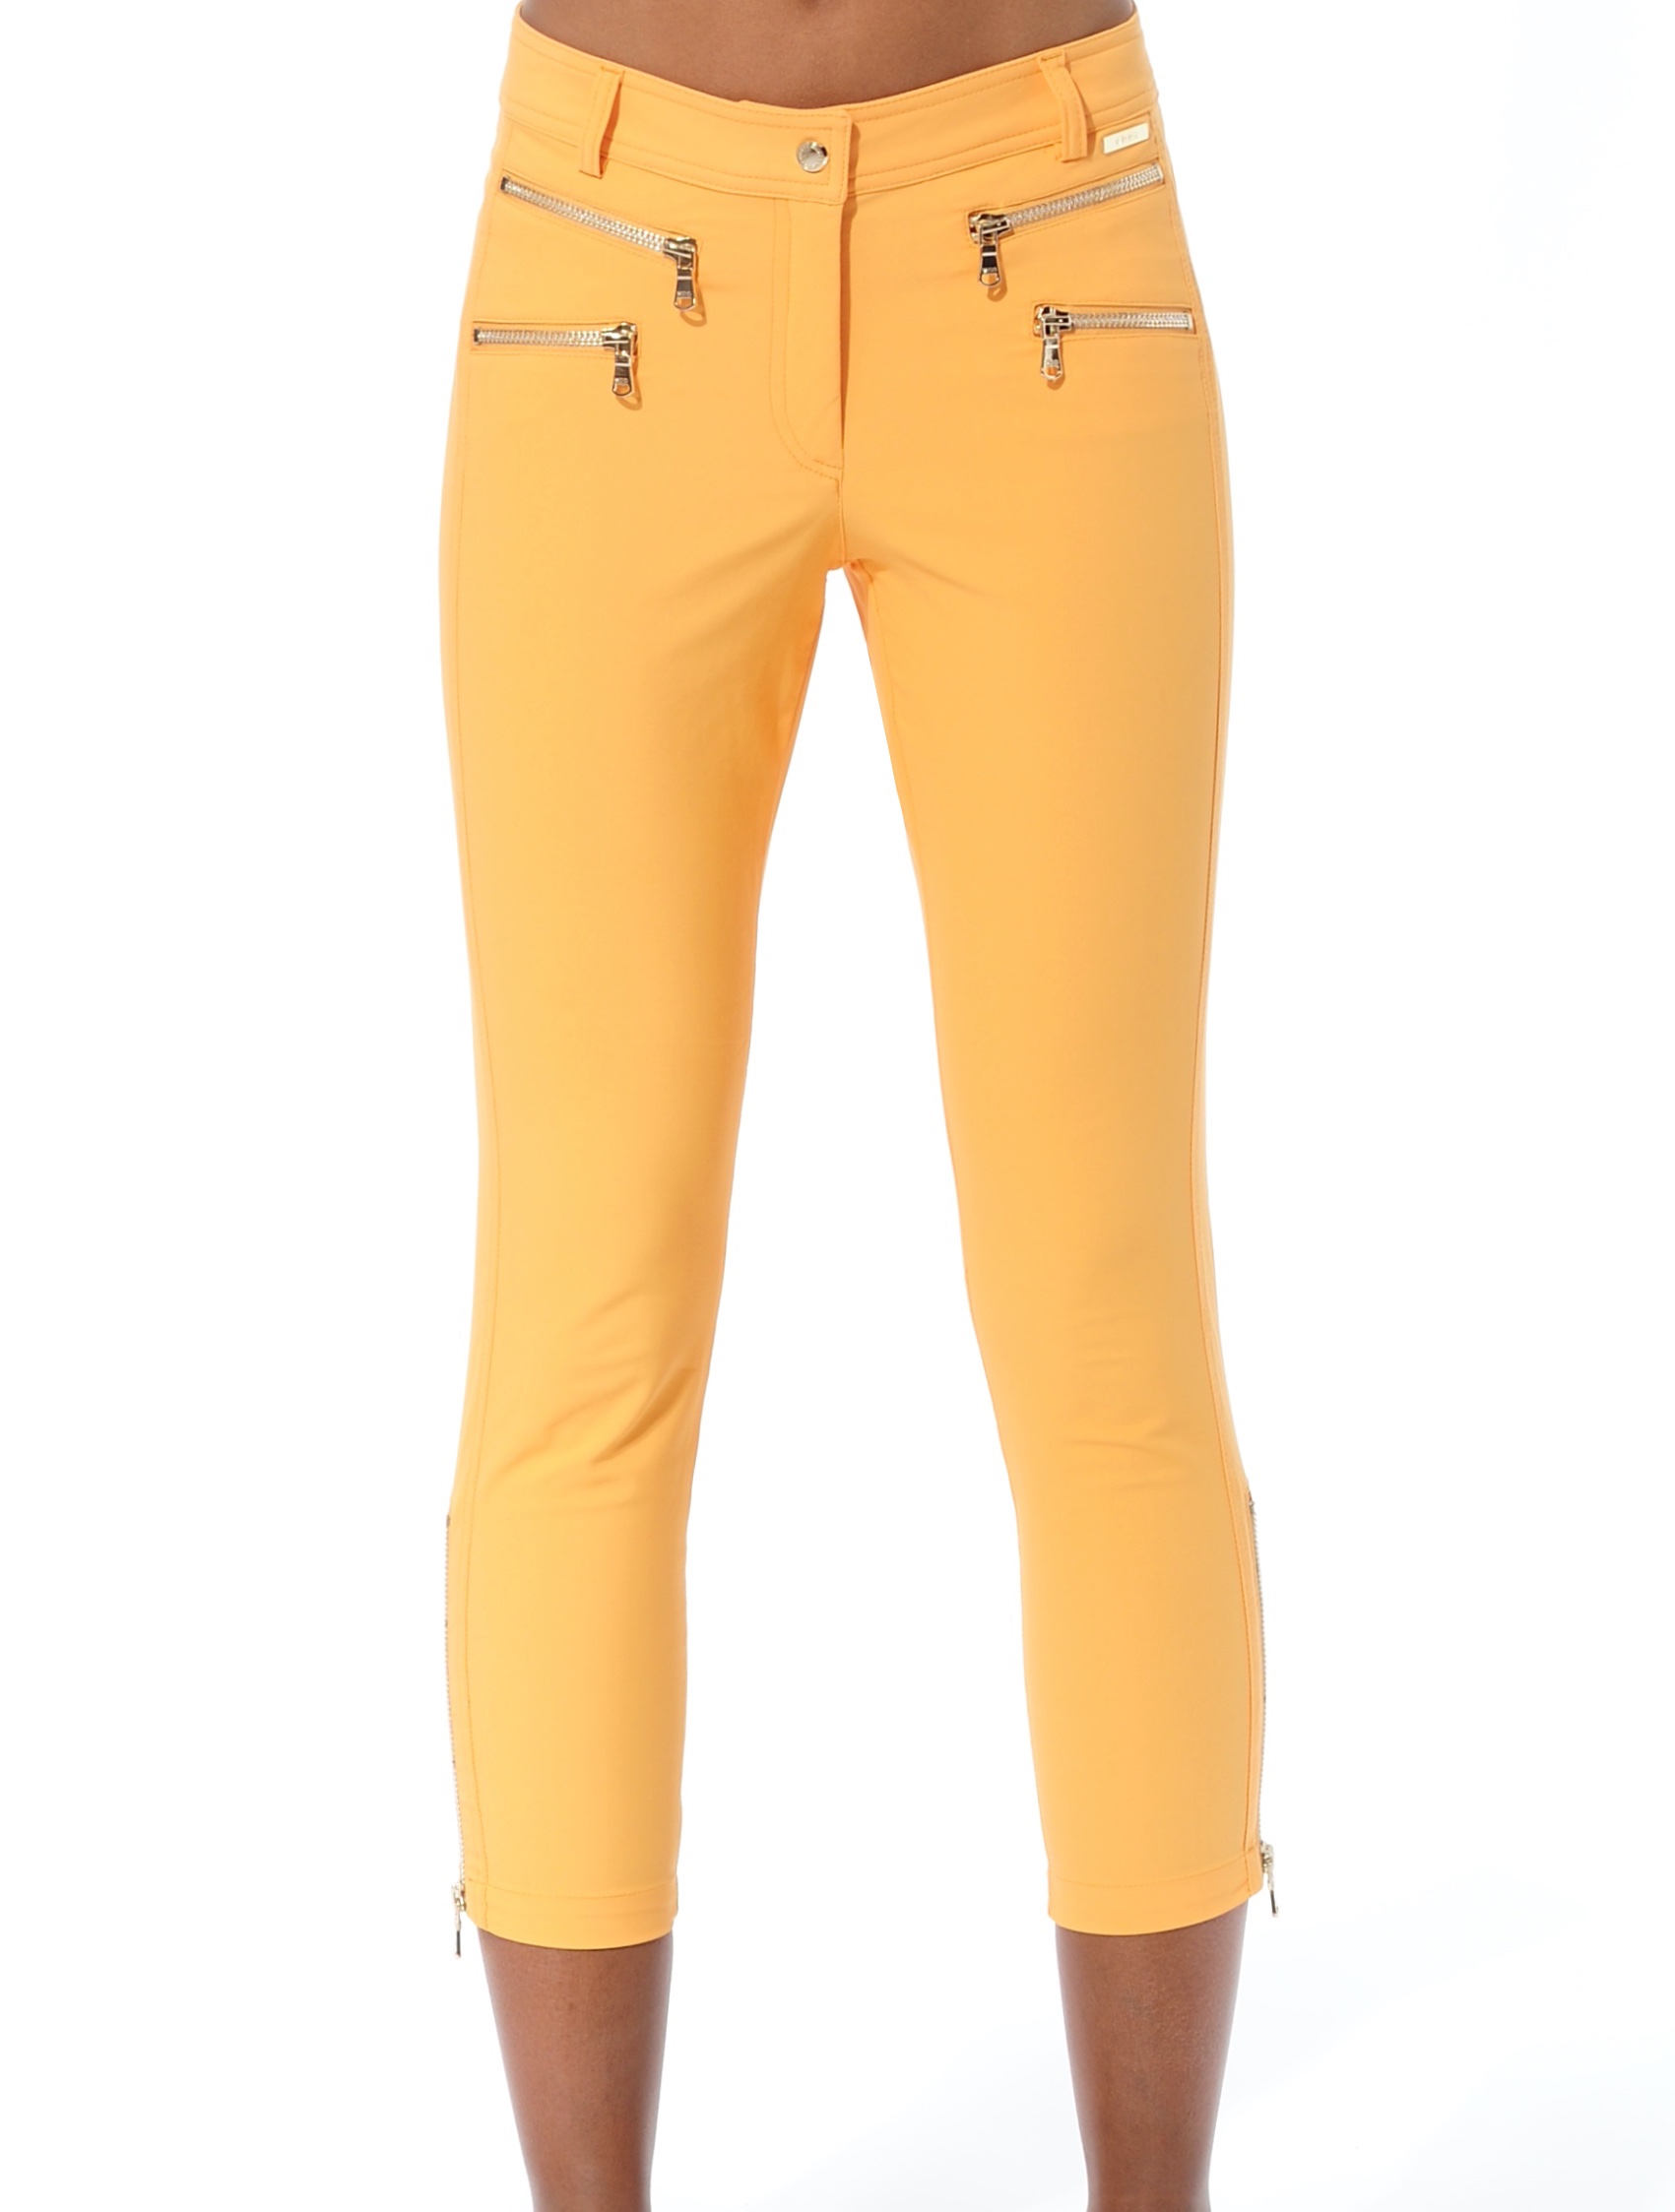 4way stretch double zip cropped pants apricot 